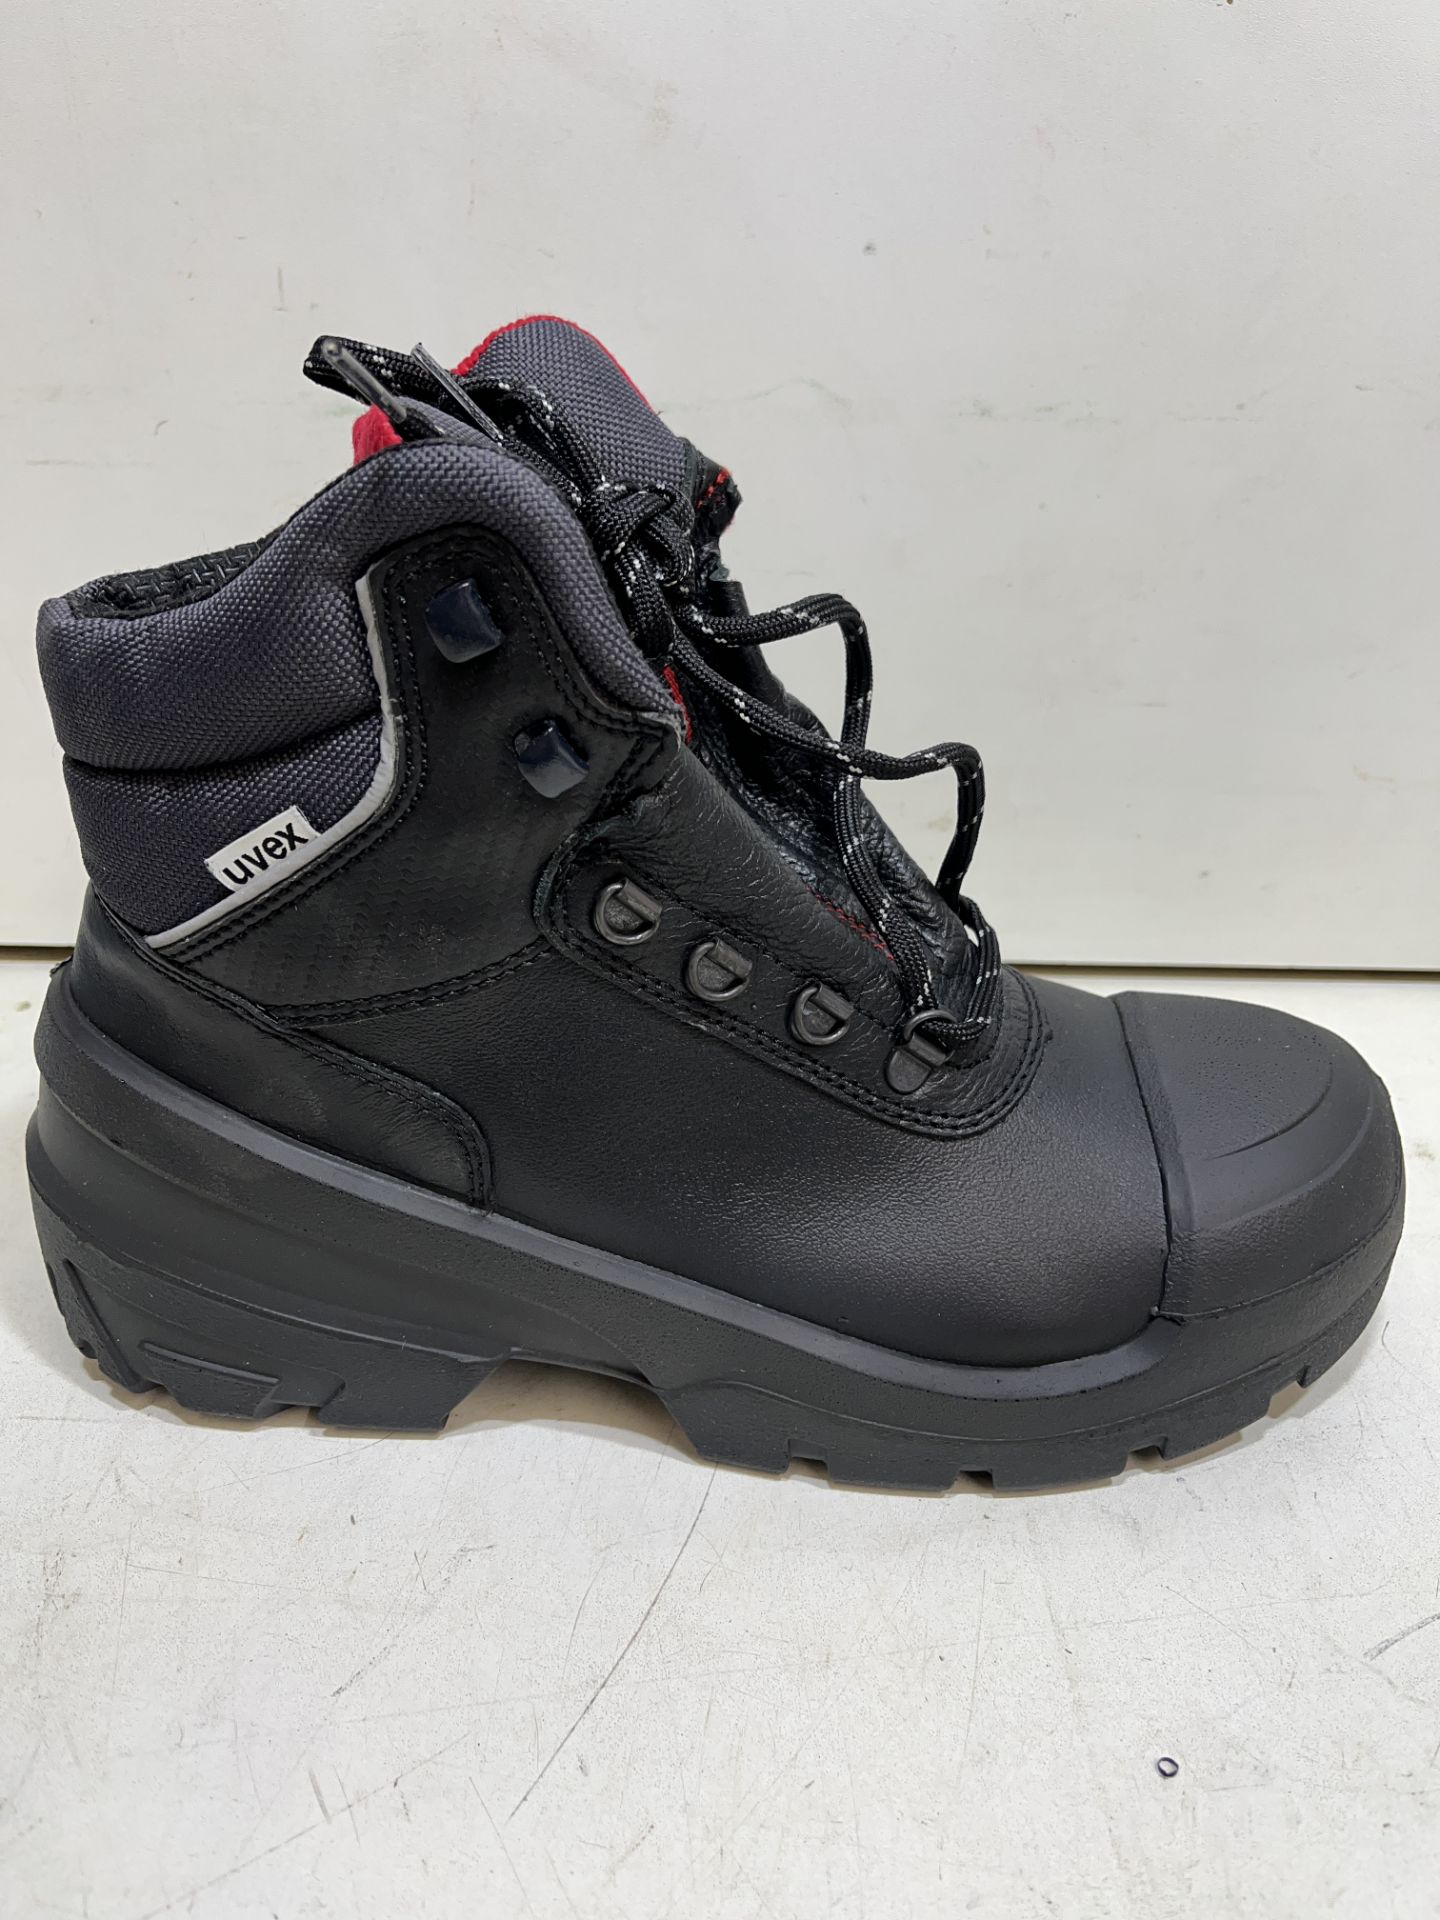 Uvex Safety Boots | UK 8 - Image 2 of 4